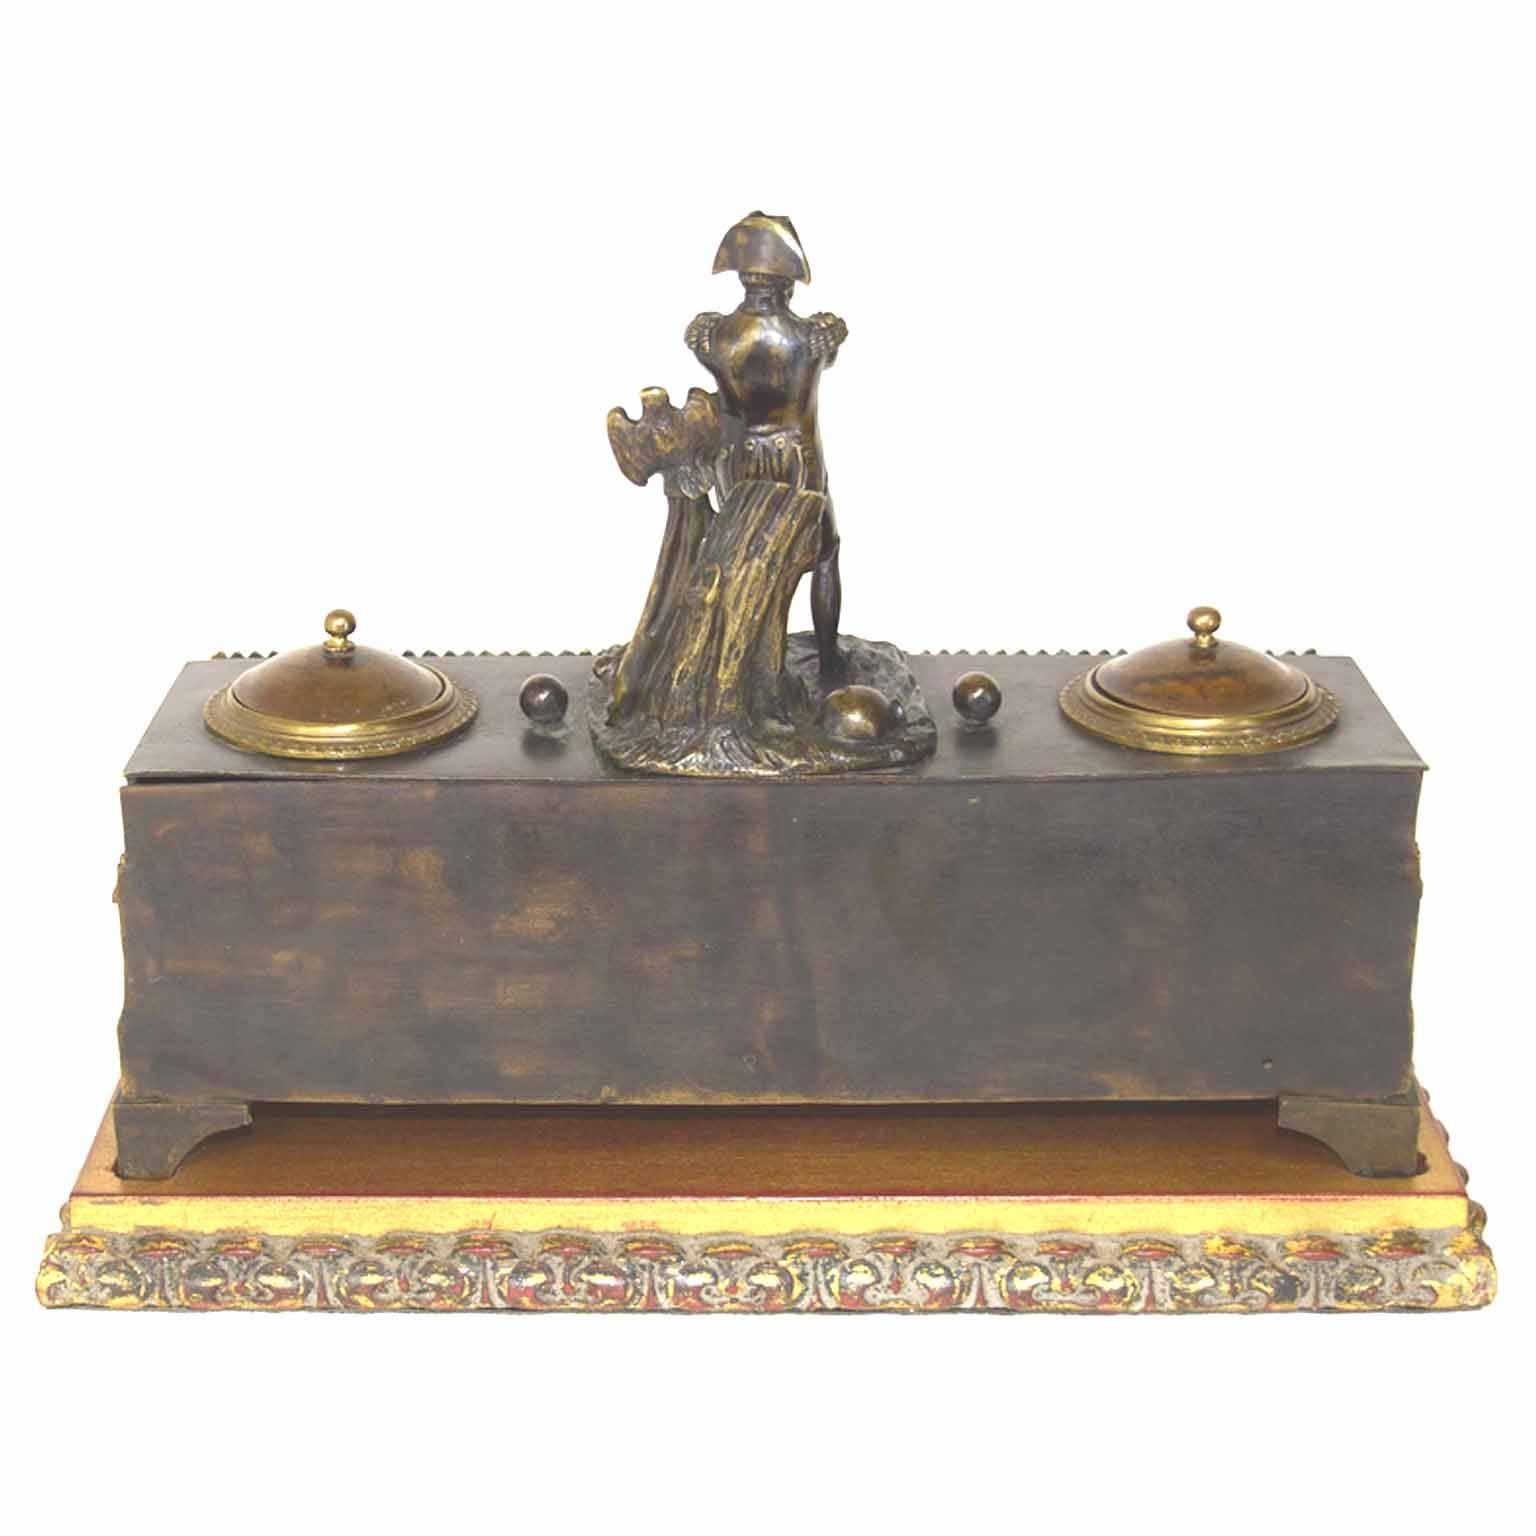 Very Fine Antique French Charles X Period Ormolu Napoleon Ink Well, circa 1825 In Good Condition For Sale In Houston, TX